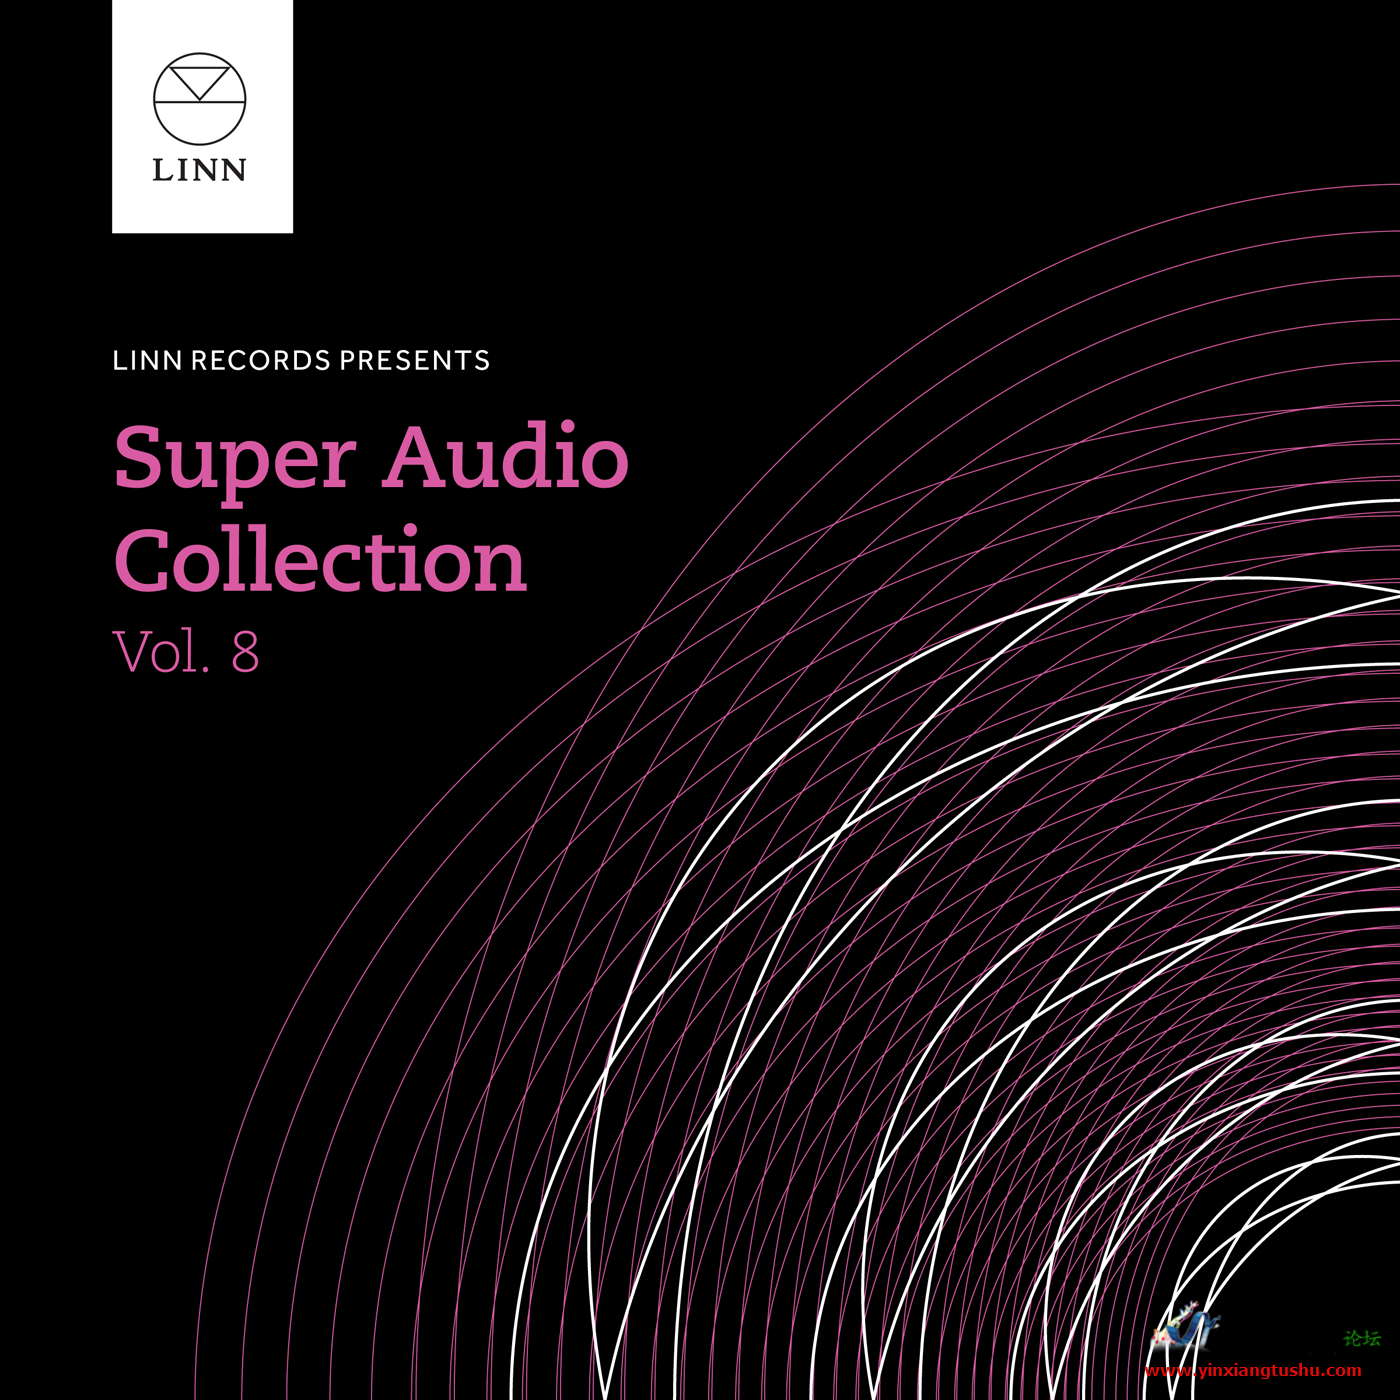 Super Audio Collection Vol 8 - Sleeve.png